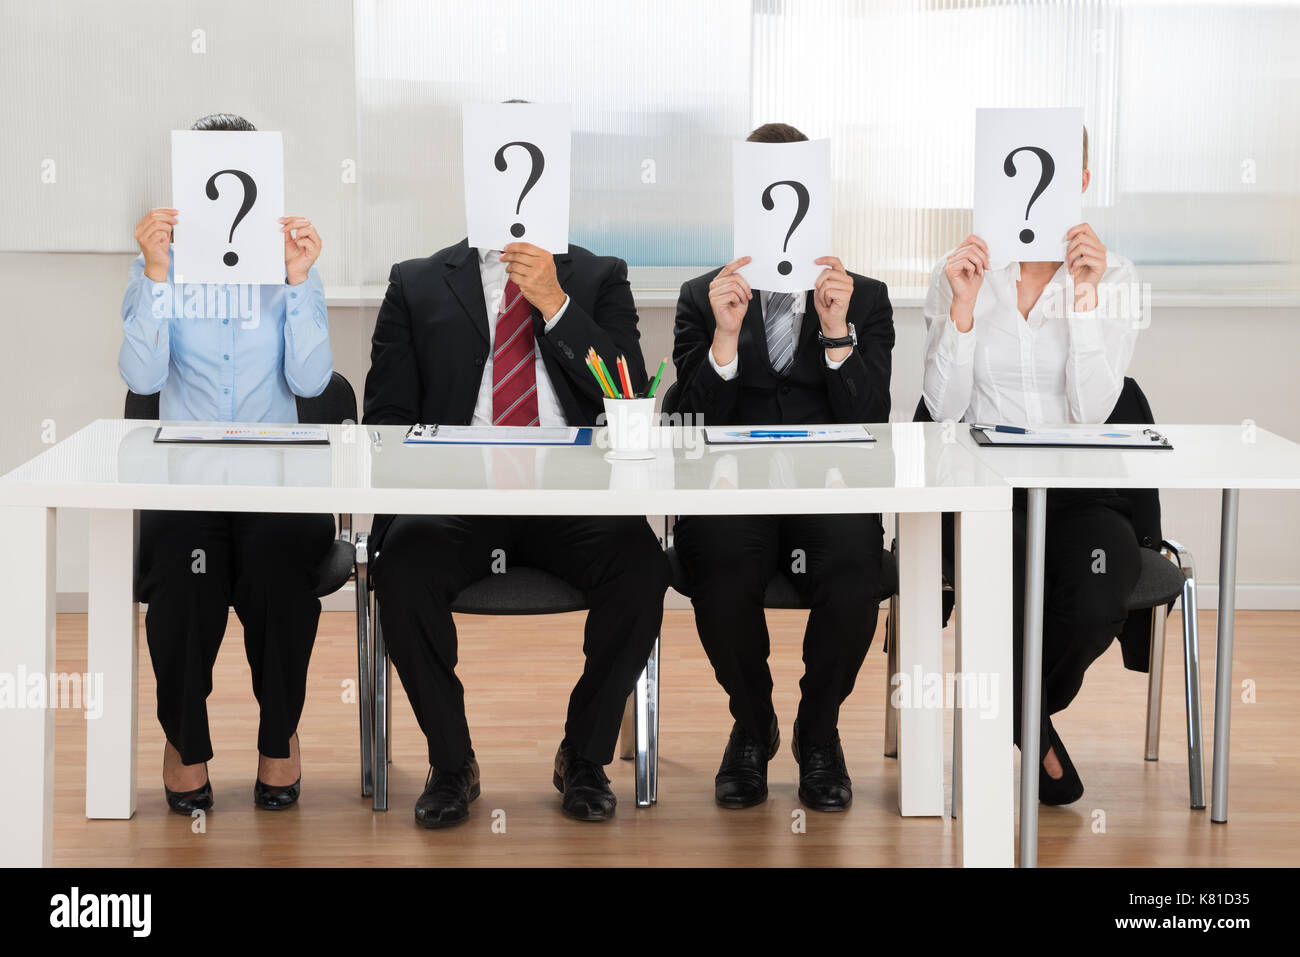 Businesspeople Team Hiding Face With Question Mark Sign At Desk Stock Photo